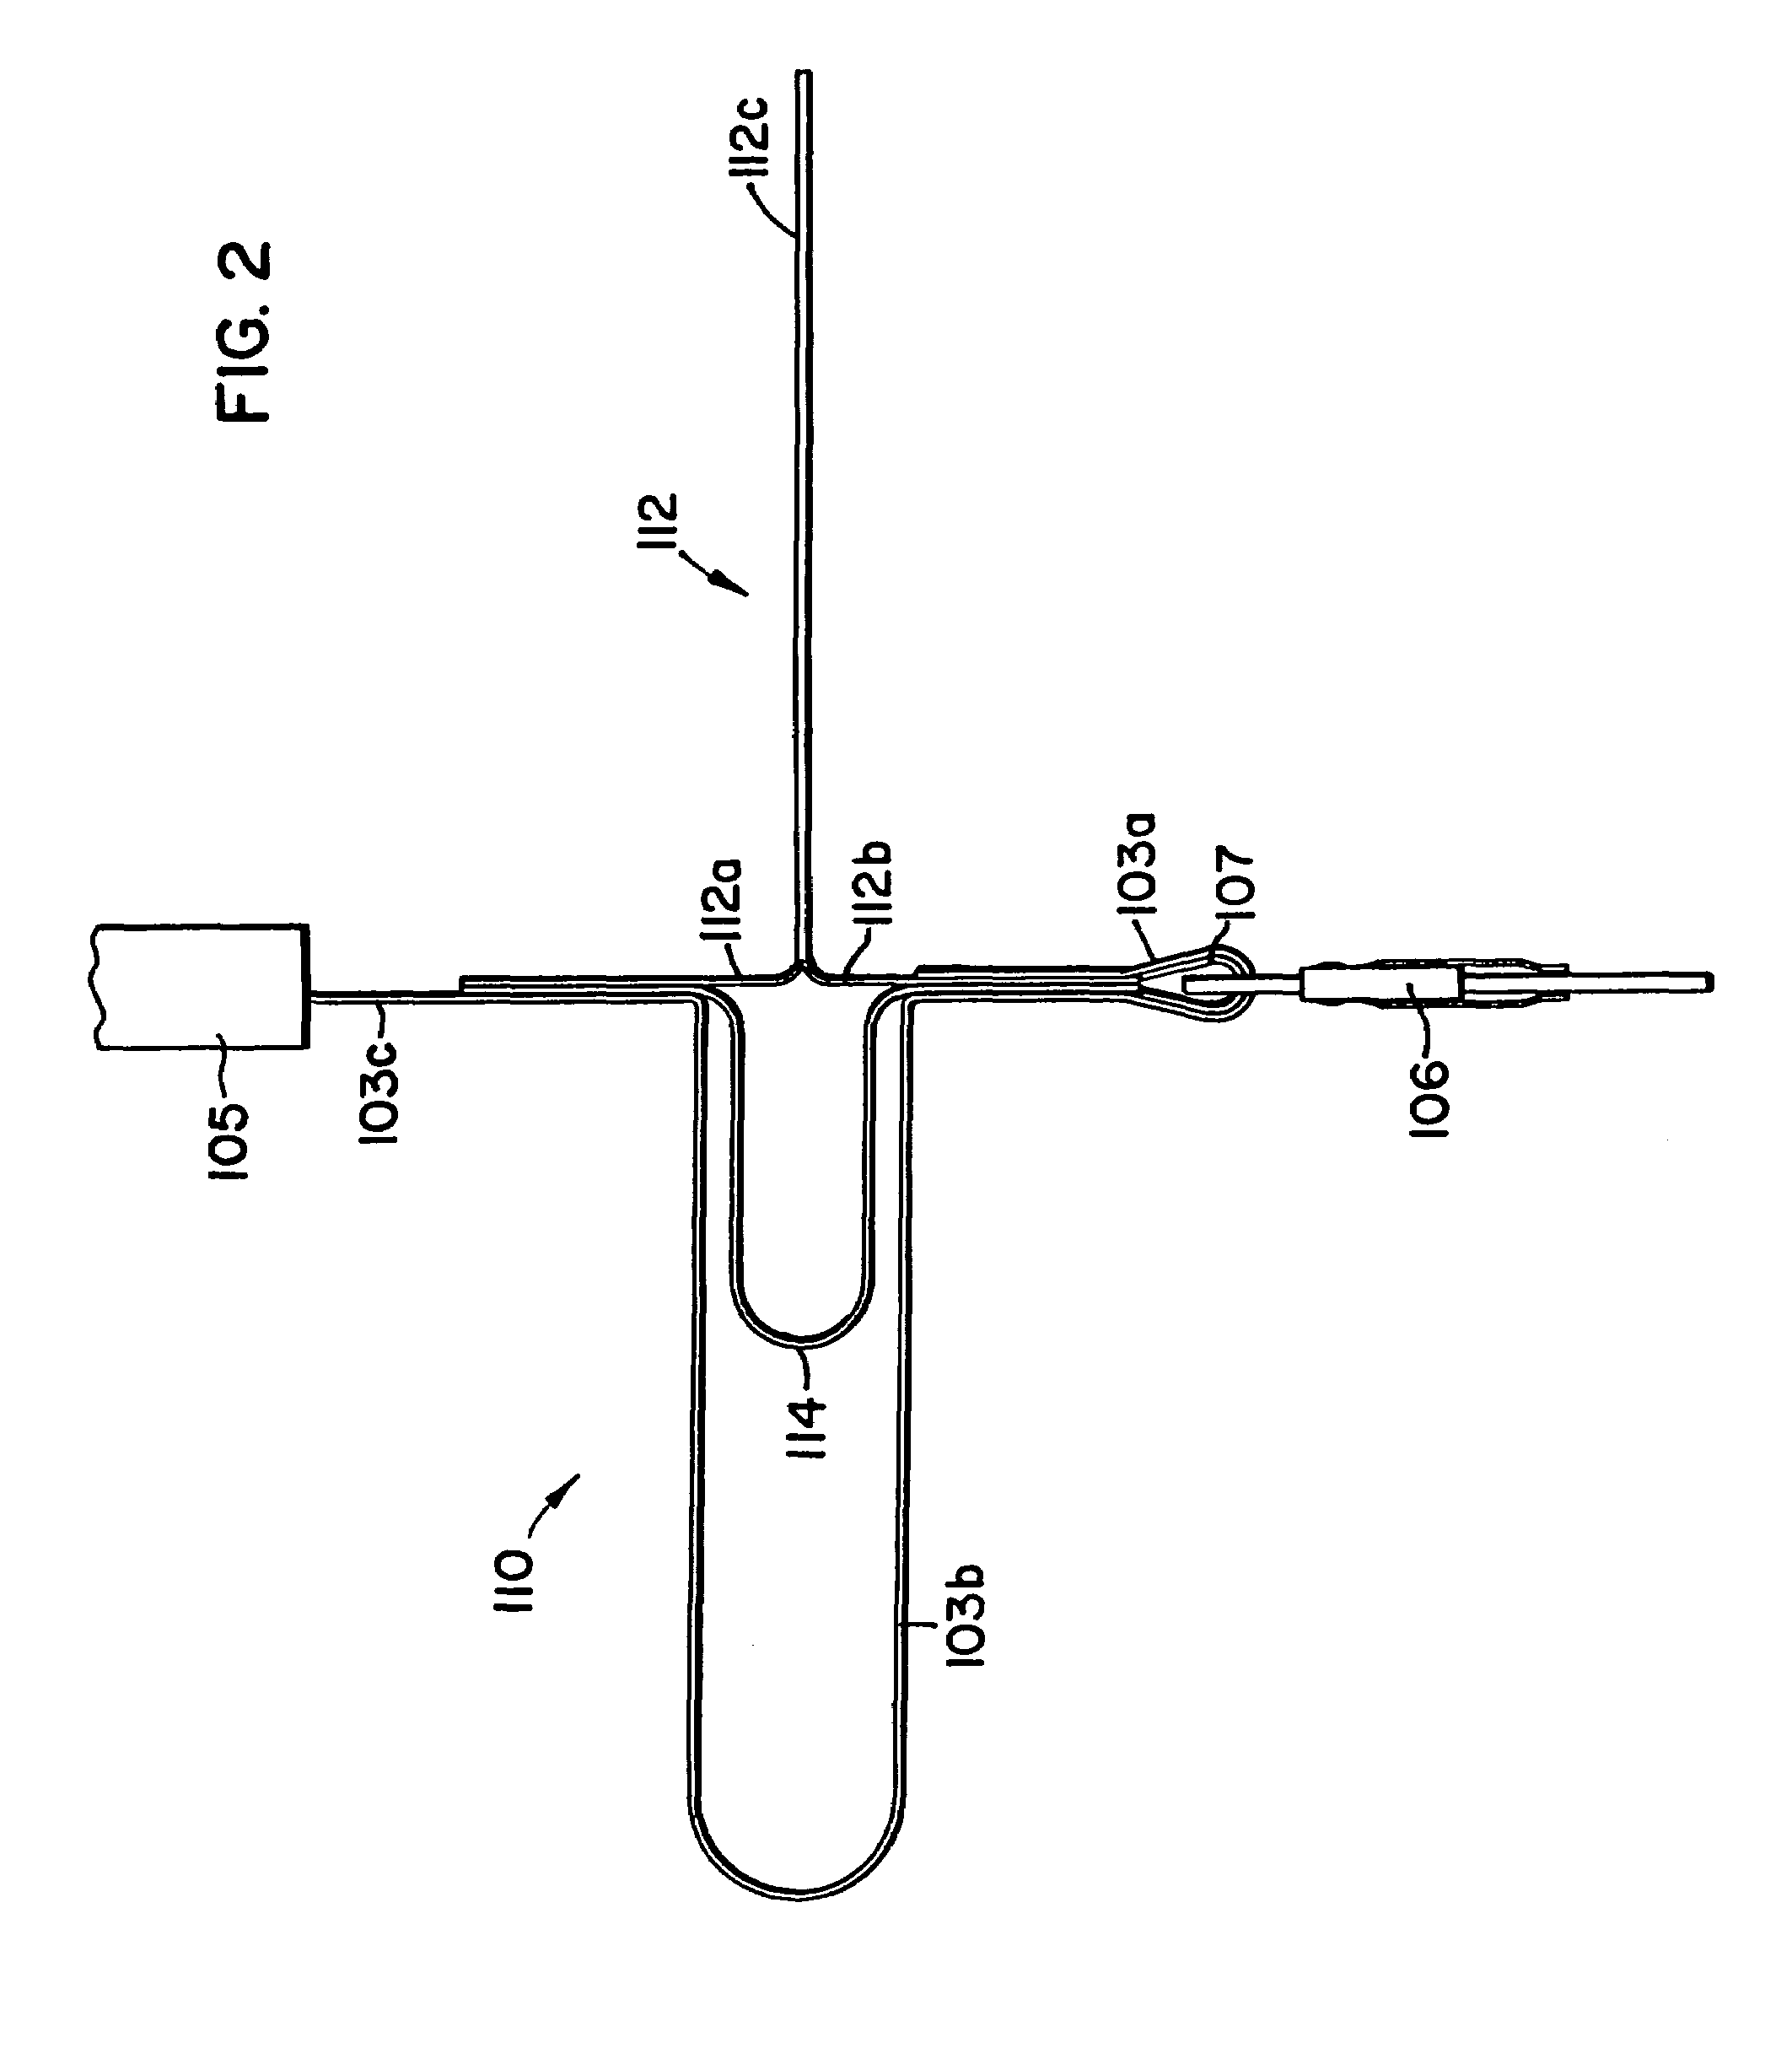 Tension device for use with a self-retracting lifeline